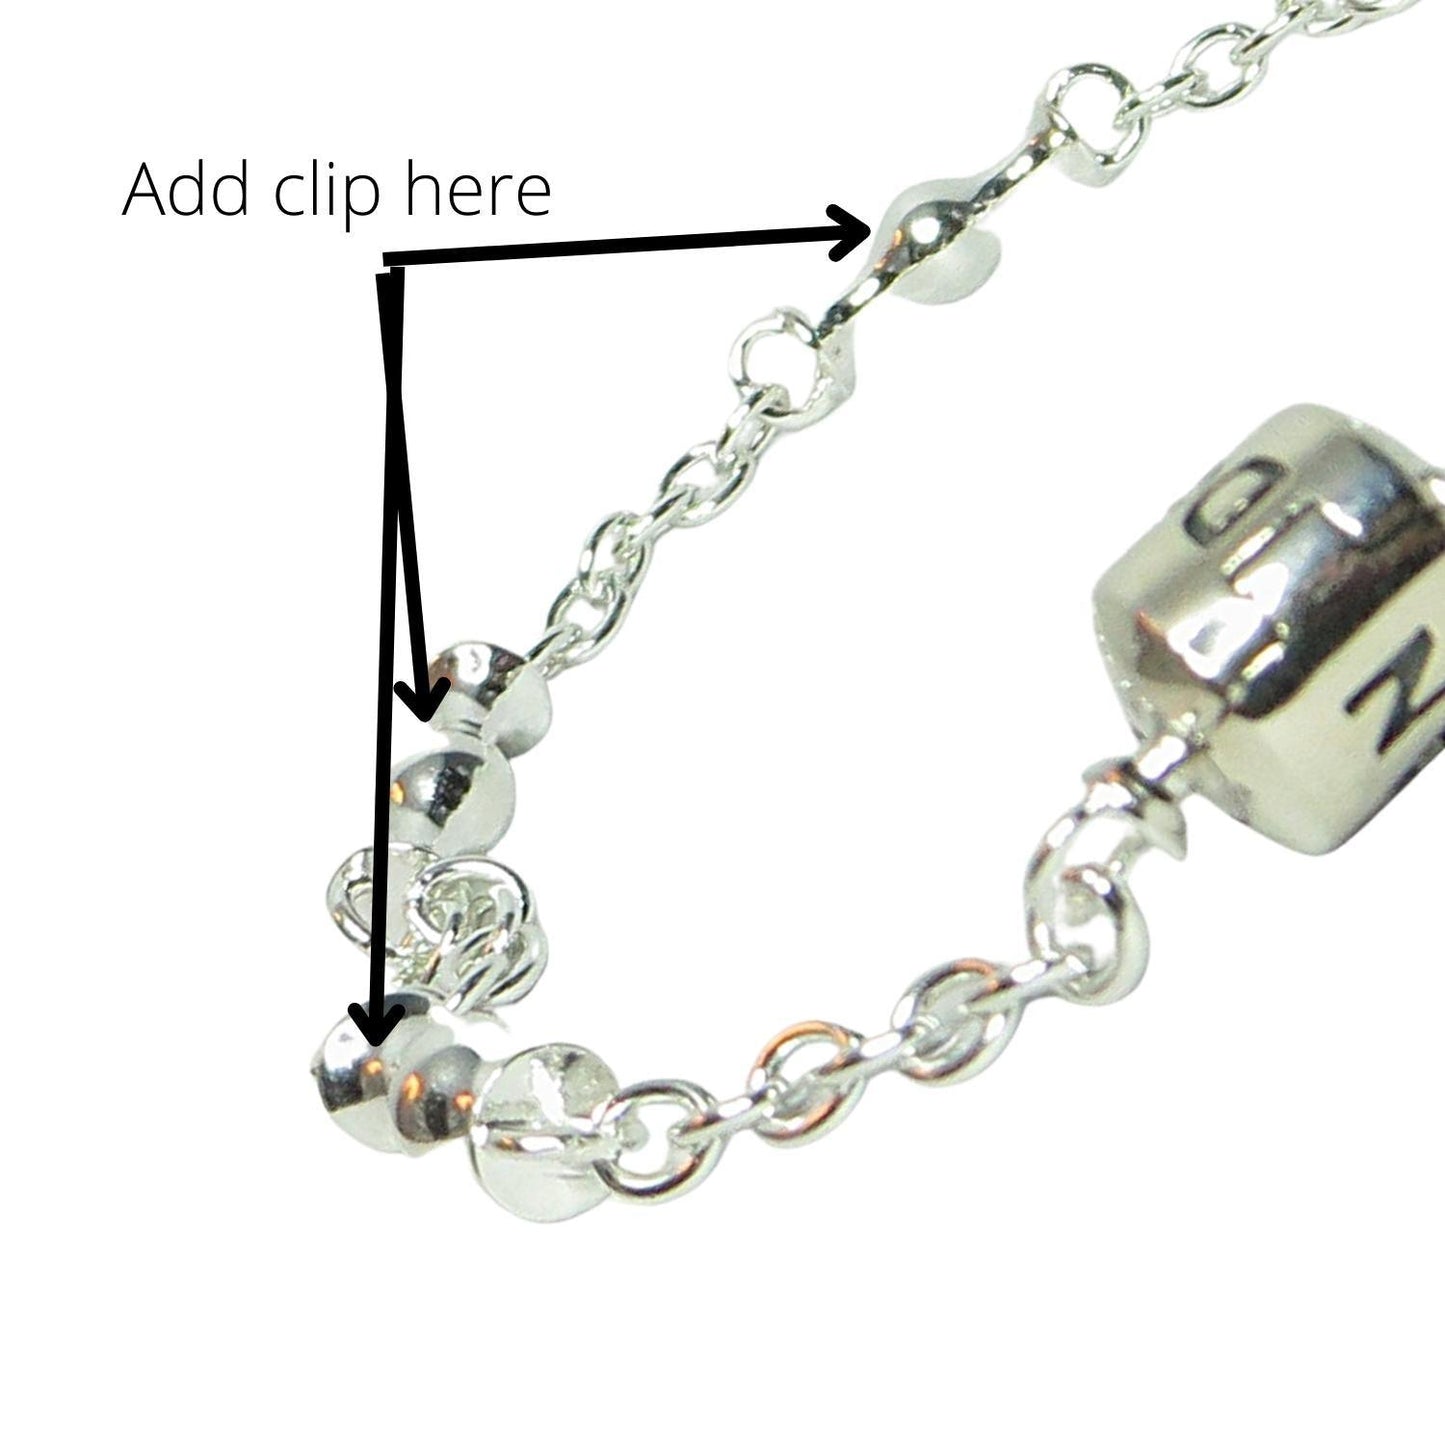 PANDORA 591704 5-Clip Sterling Silver Chain Link Charm Bracelet Multiple Sizes - Charming Jilly